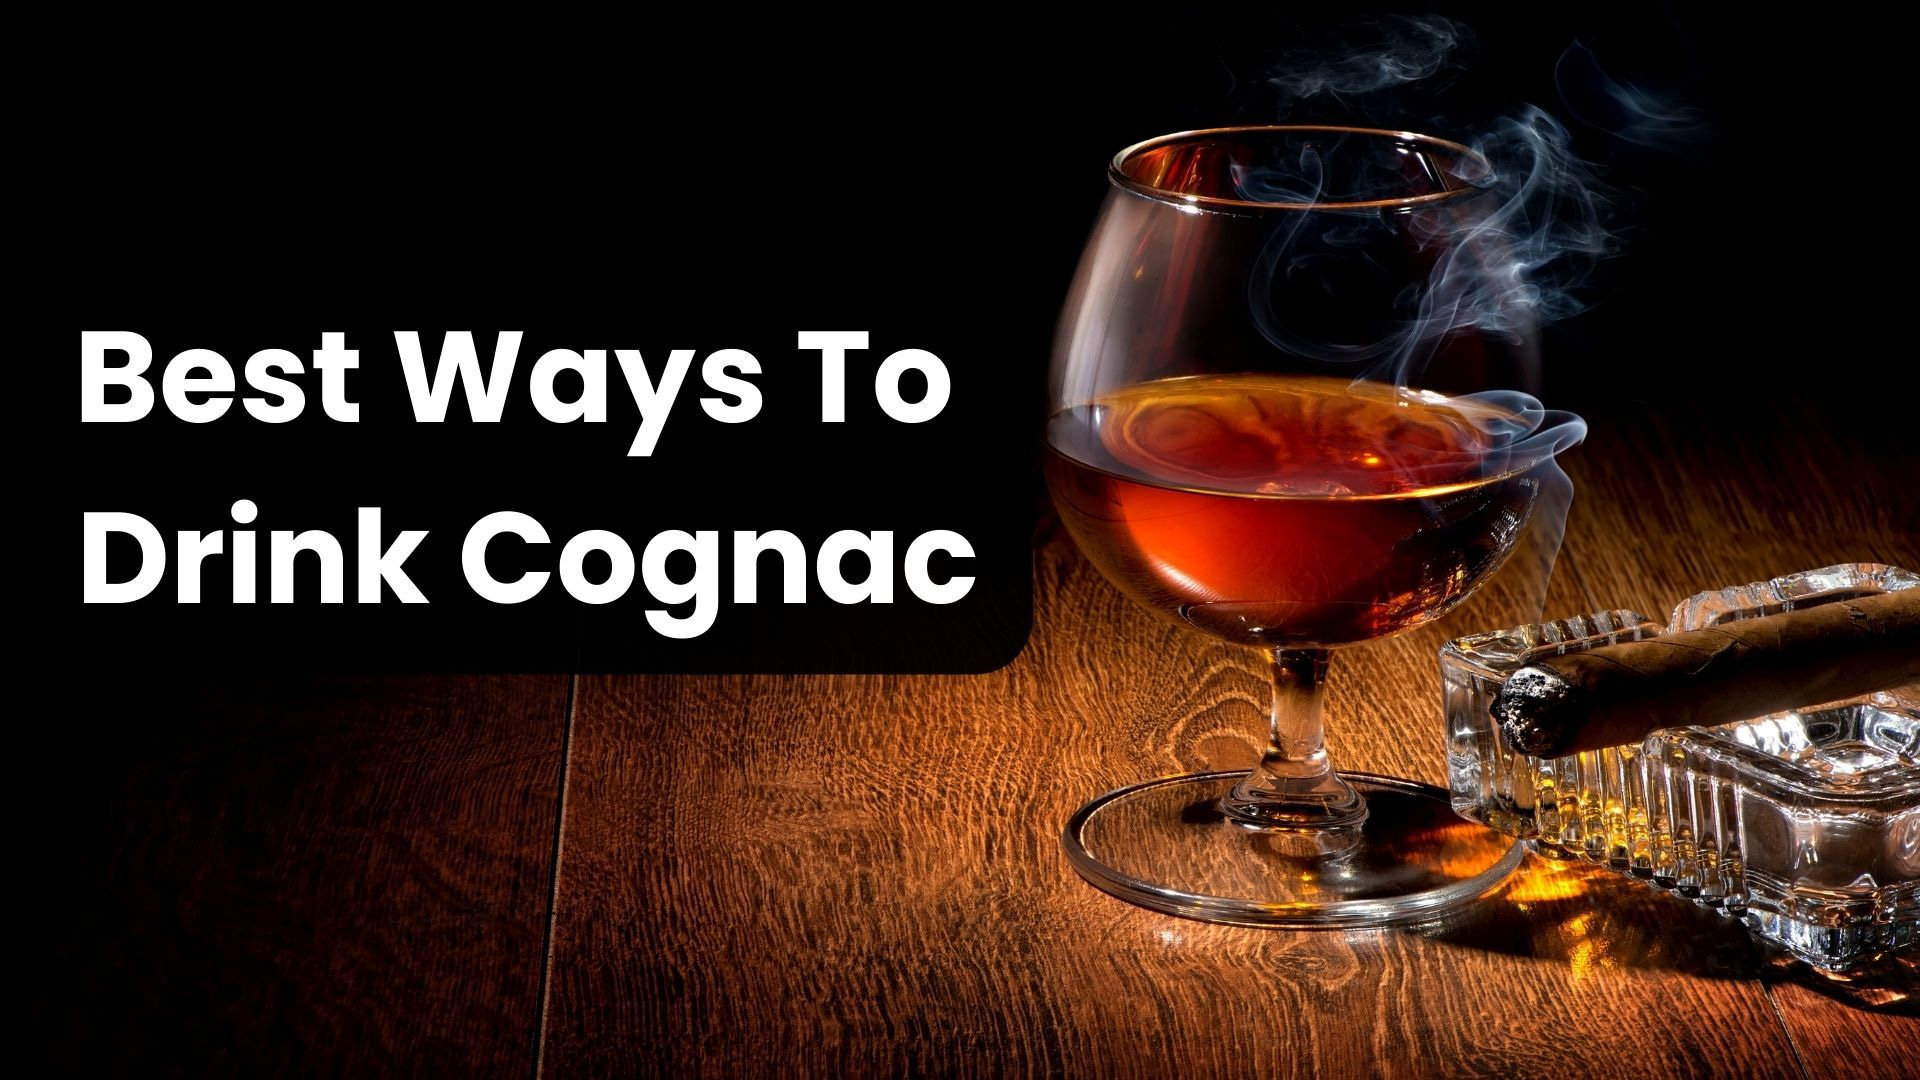 What Are The Best Ways To Drink Cognac?